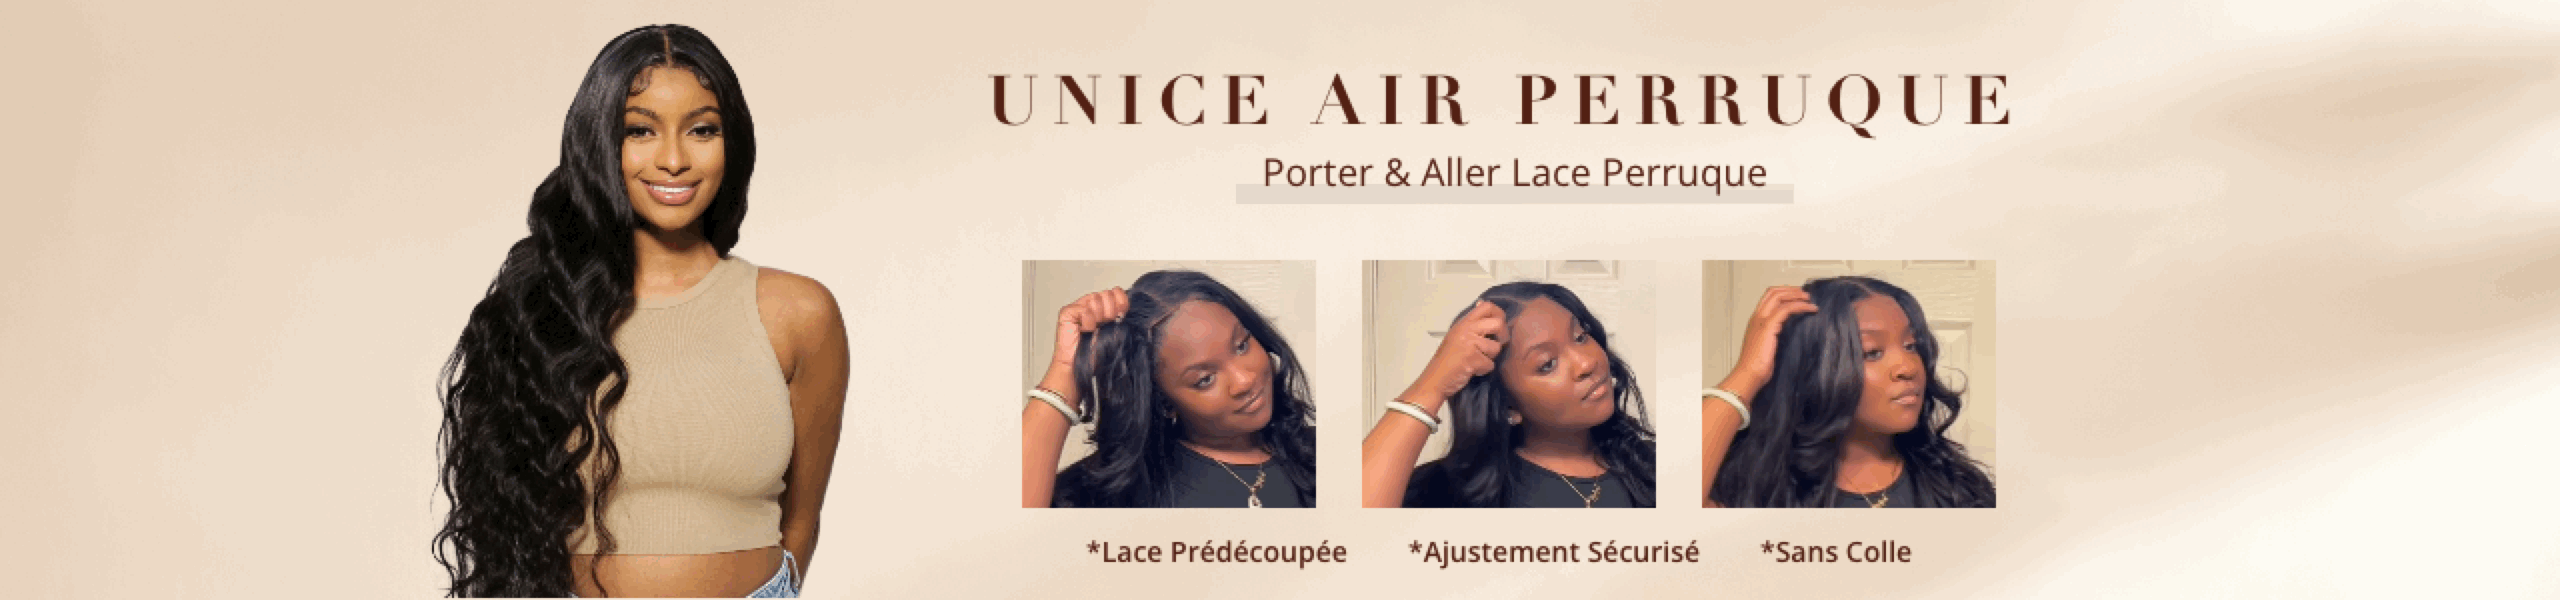 UNice Air Perruques